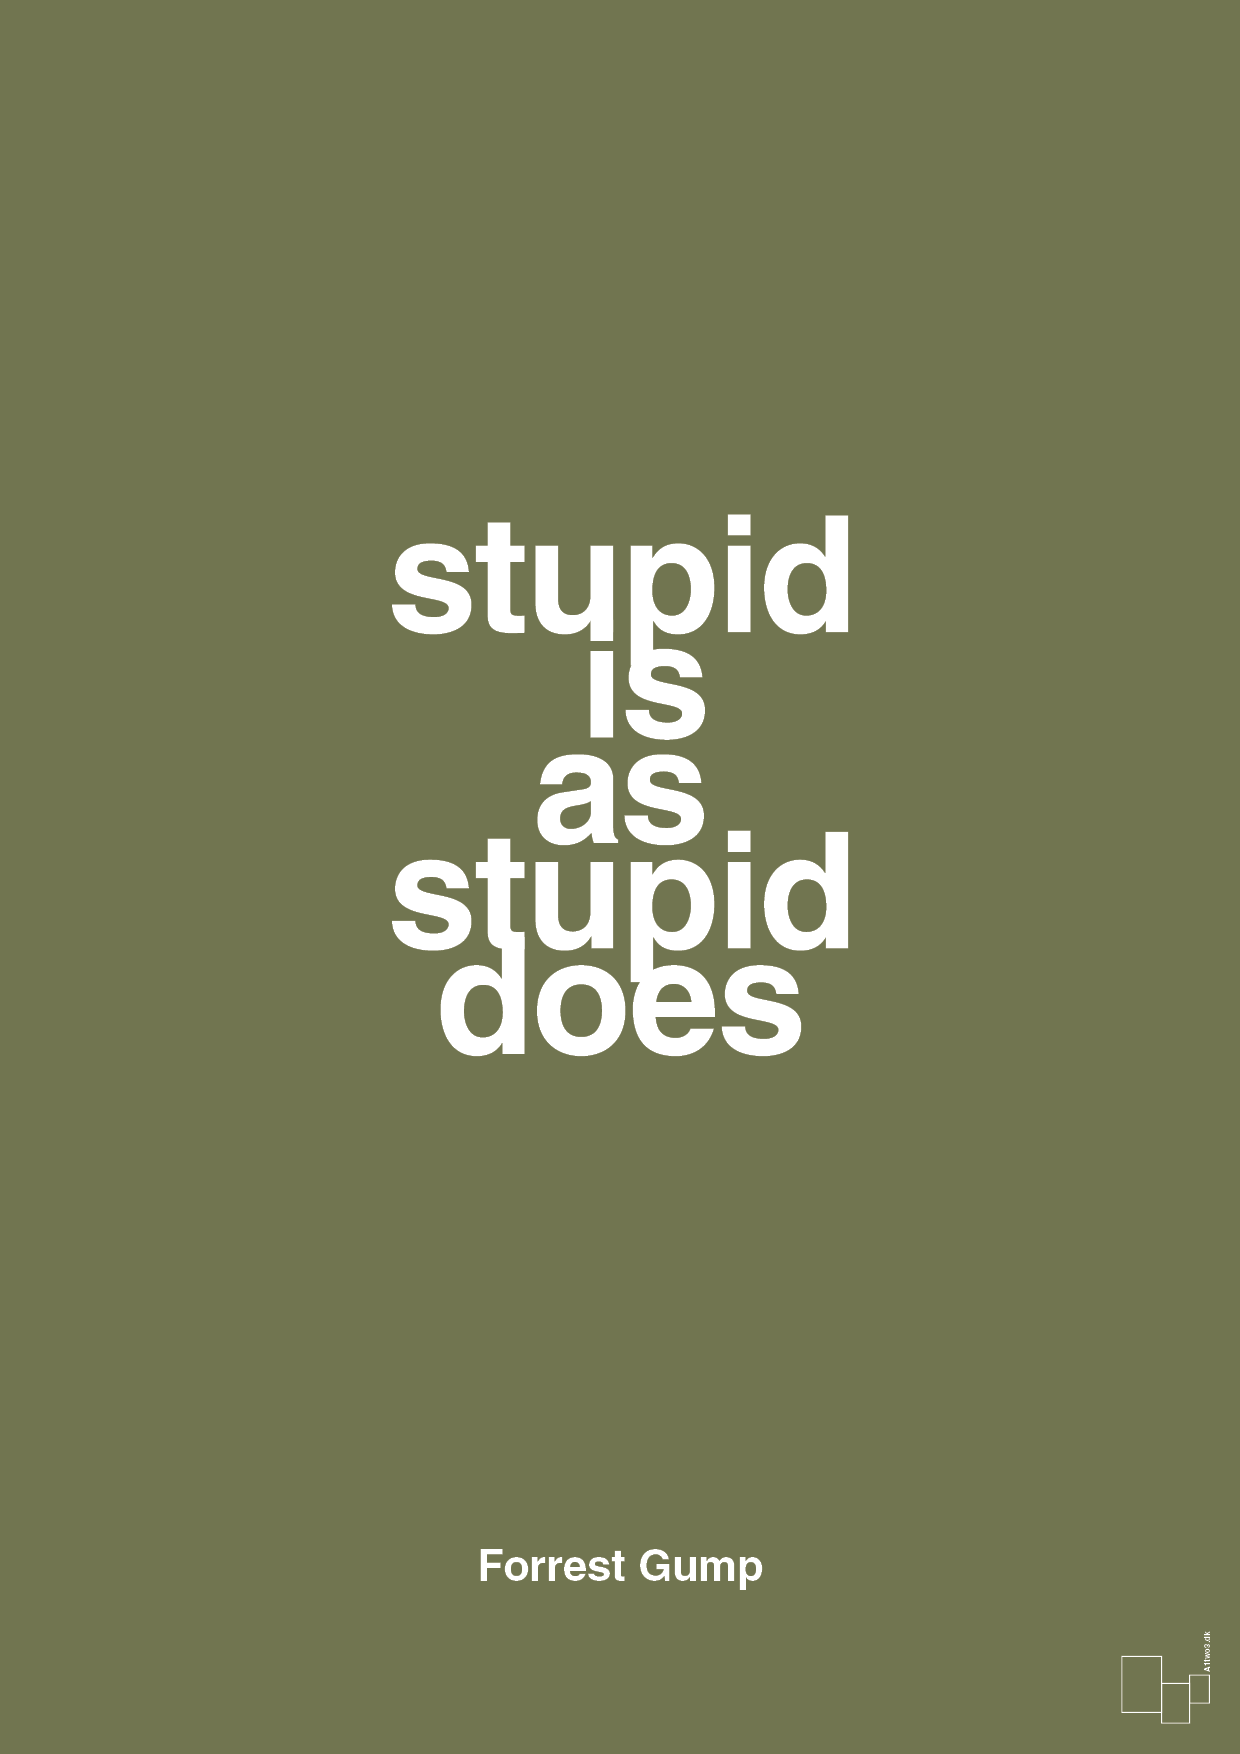 stupid is as stupid does - Plakat med Citater i Secret Meadow